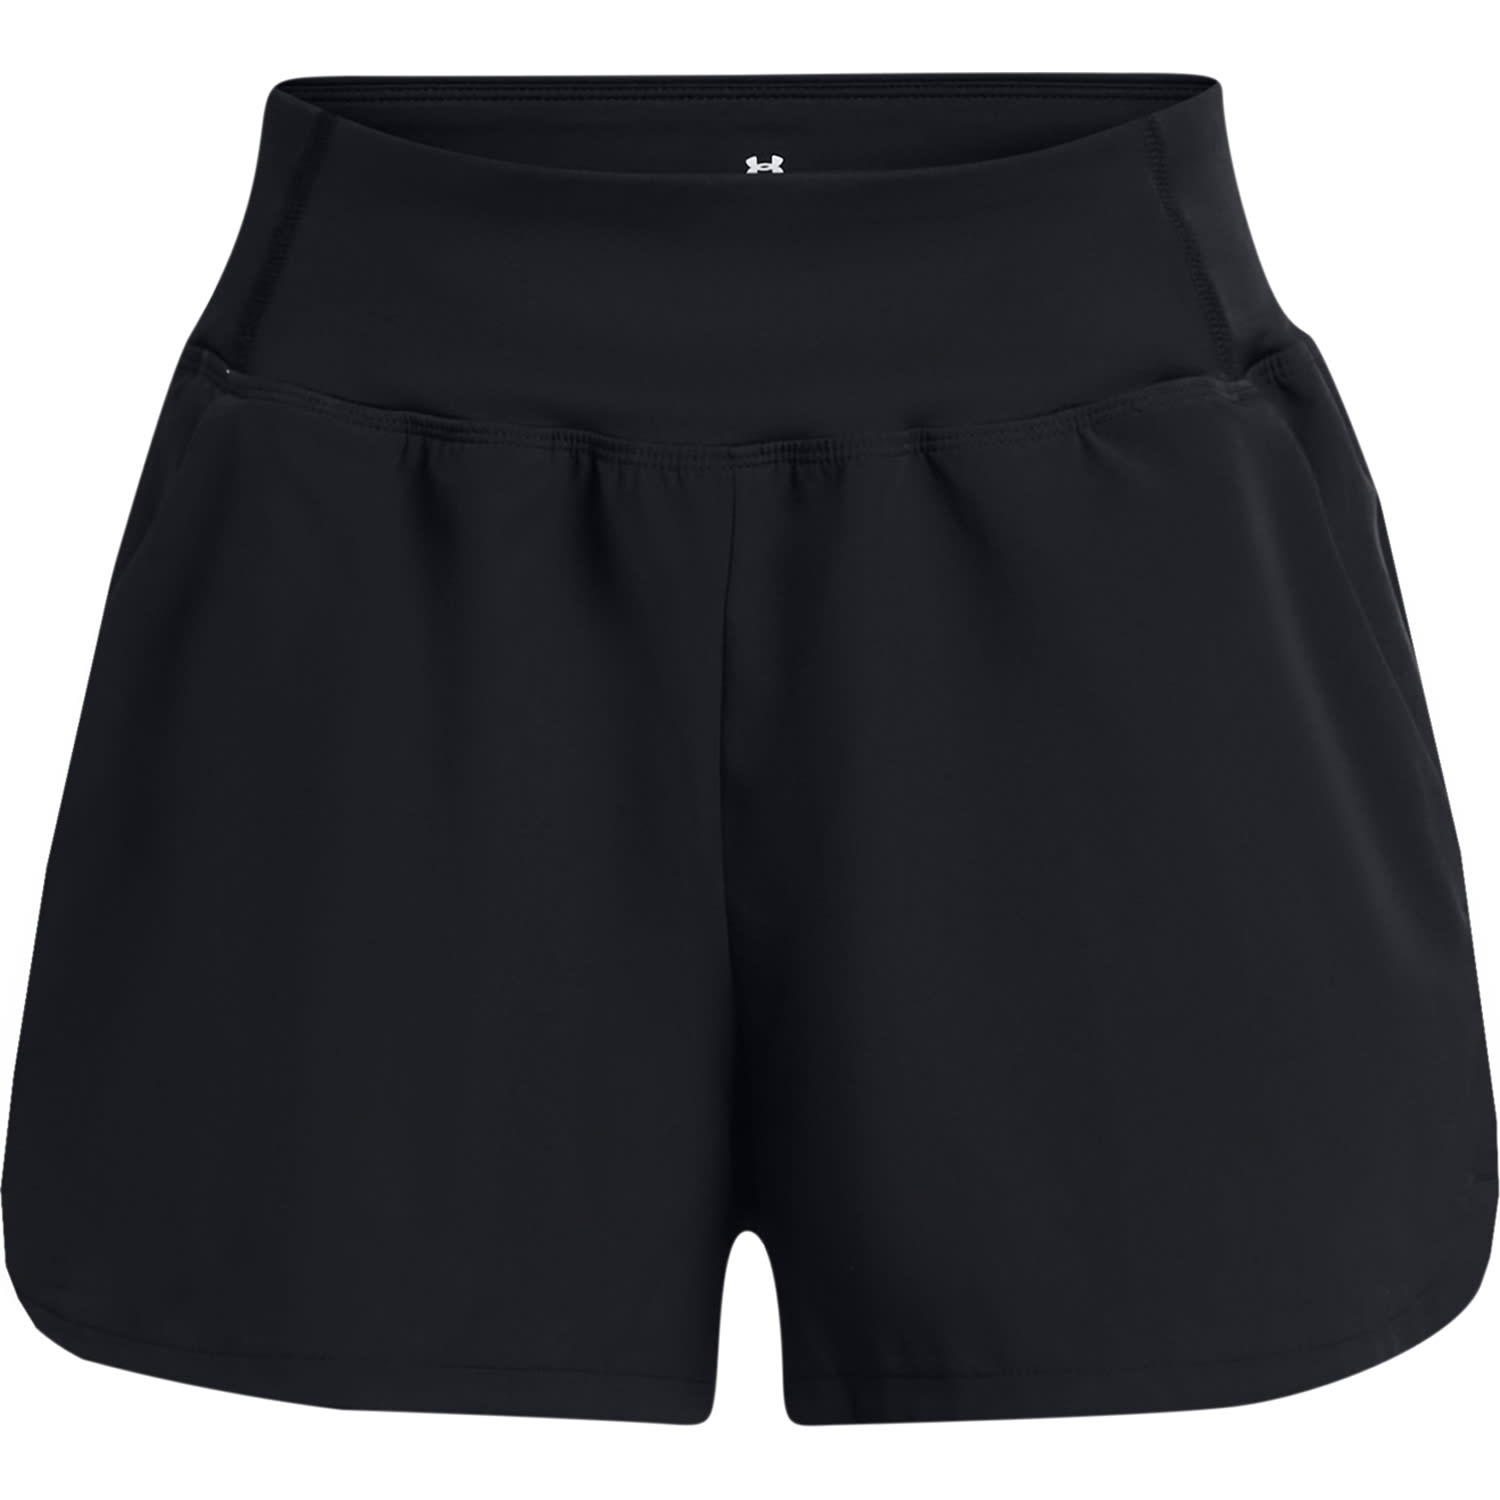 Under Armour® Women’s Fusion 5" Shorts